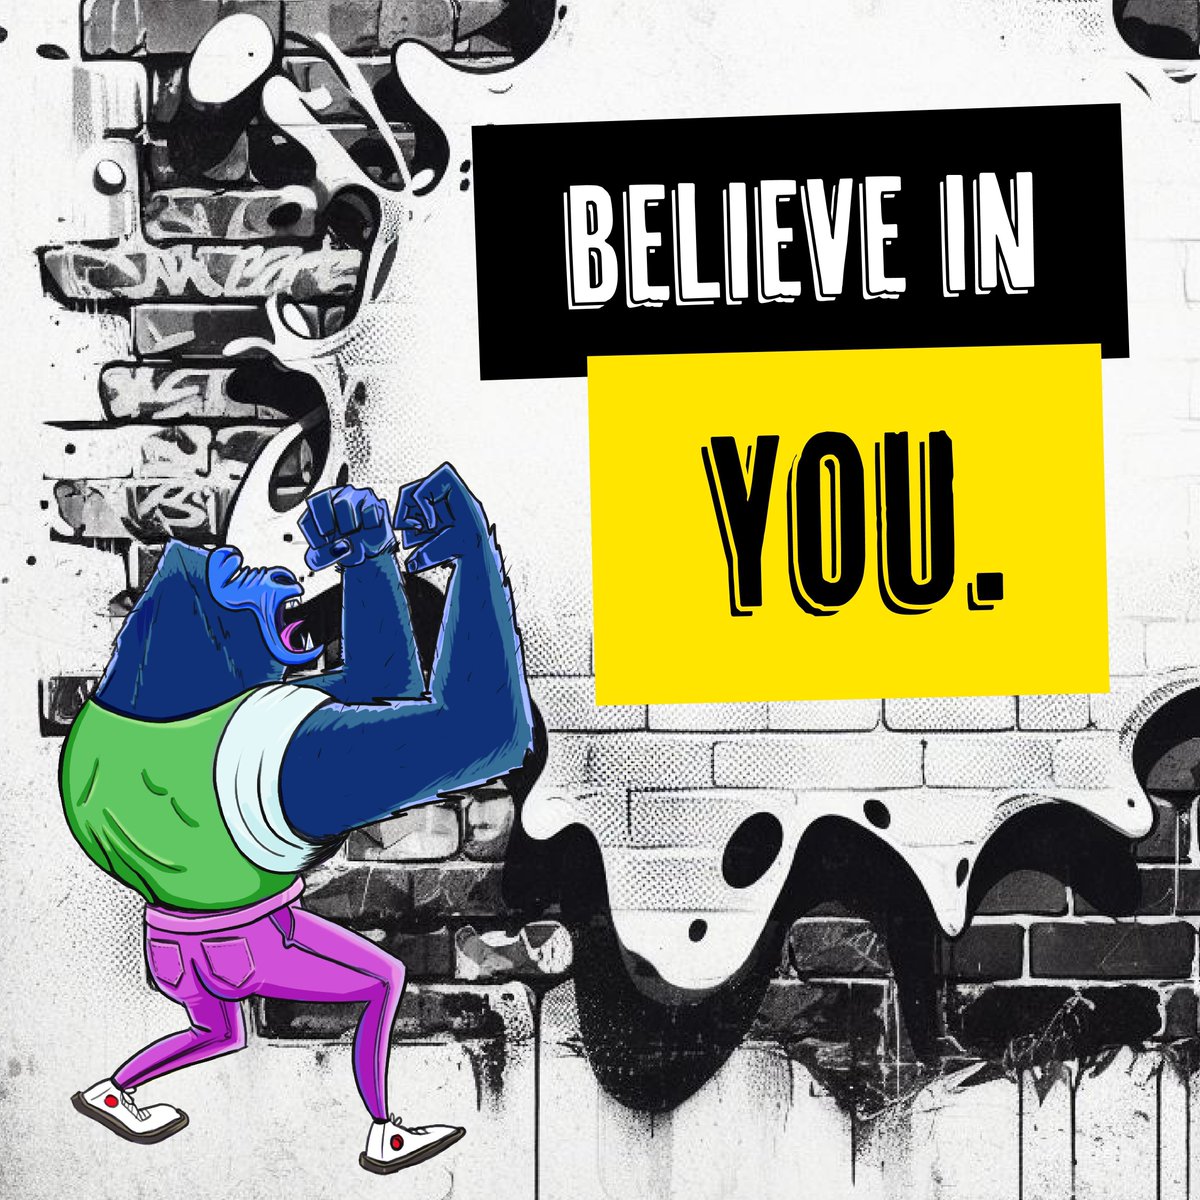 On those tough days, here's a reminder: Believe in Yourself 💛

You have the strength and resilience to overcome any challenge.

Trust in your abilities and keep pushing forward💪✨

#MentalHealthAwarenessWeek #Grow #NeverGiveUp #MondayMotivation